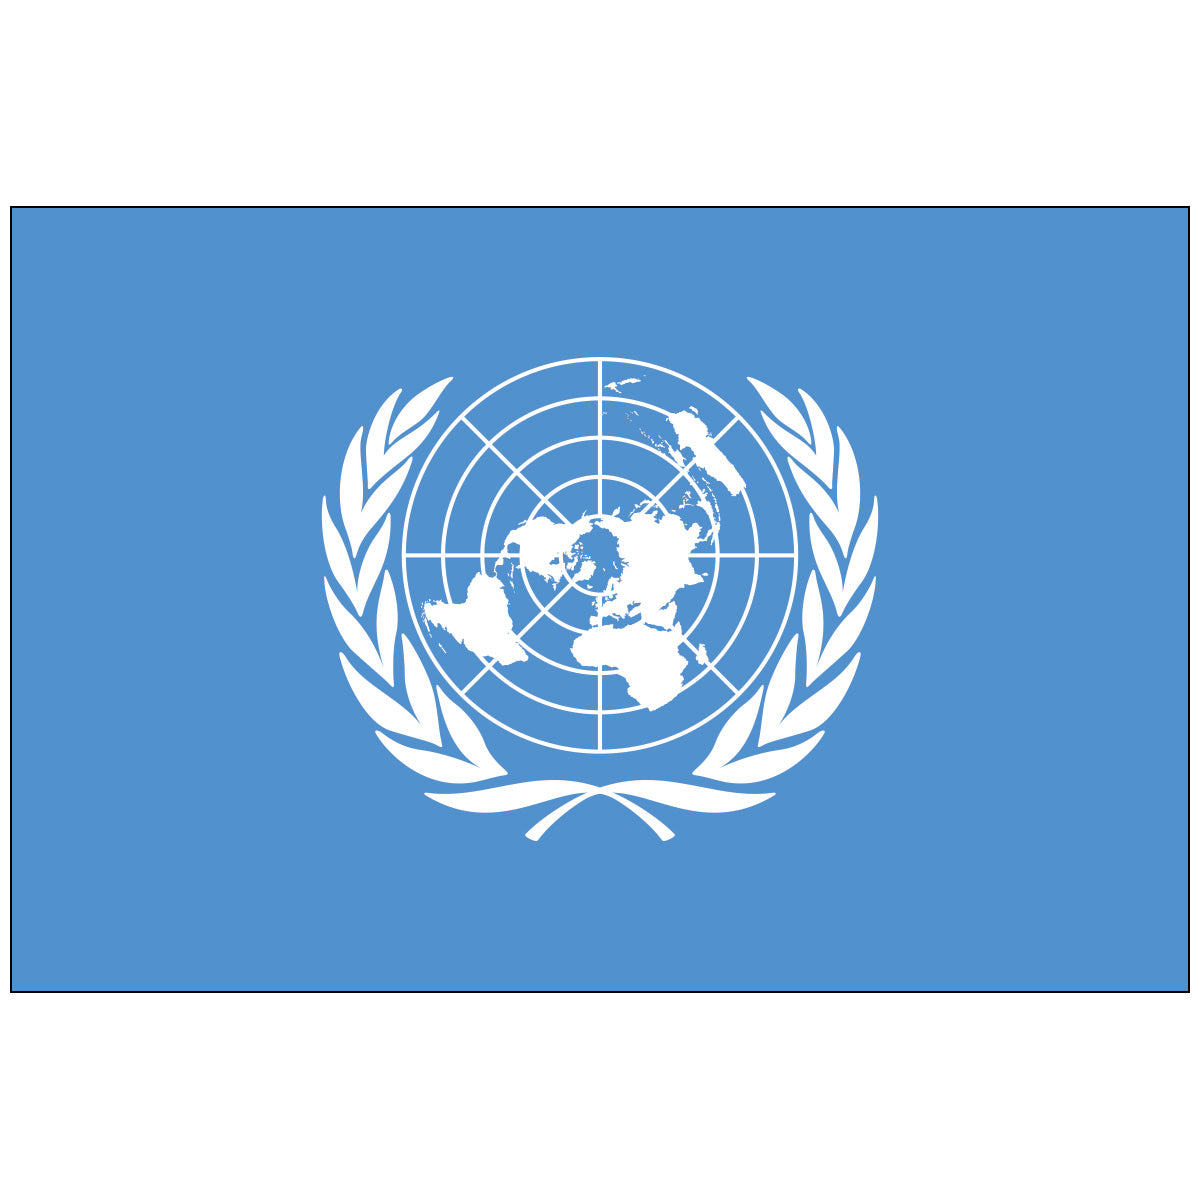 United-Nations-Flag-National-Flags-International-Flags-Country Flags-Flagsource Southeast-Woodstock-GA